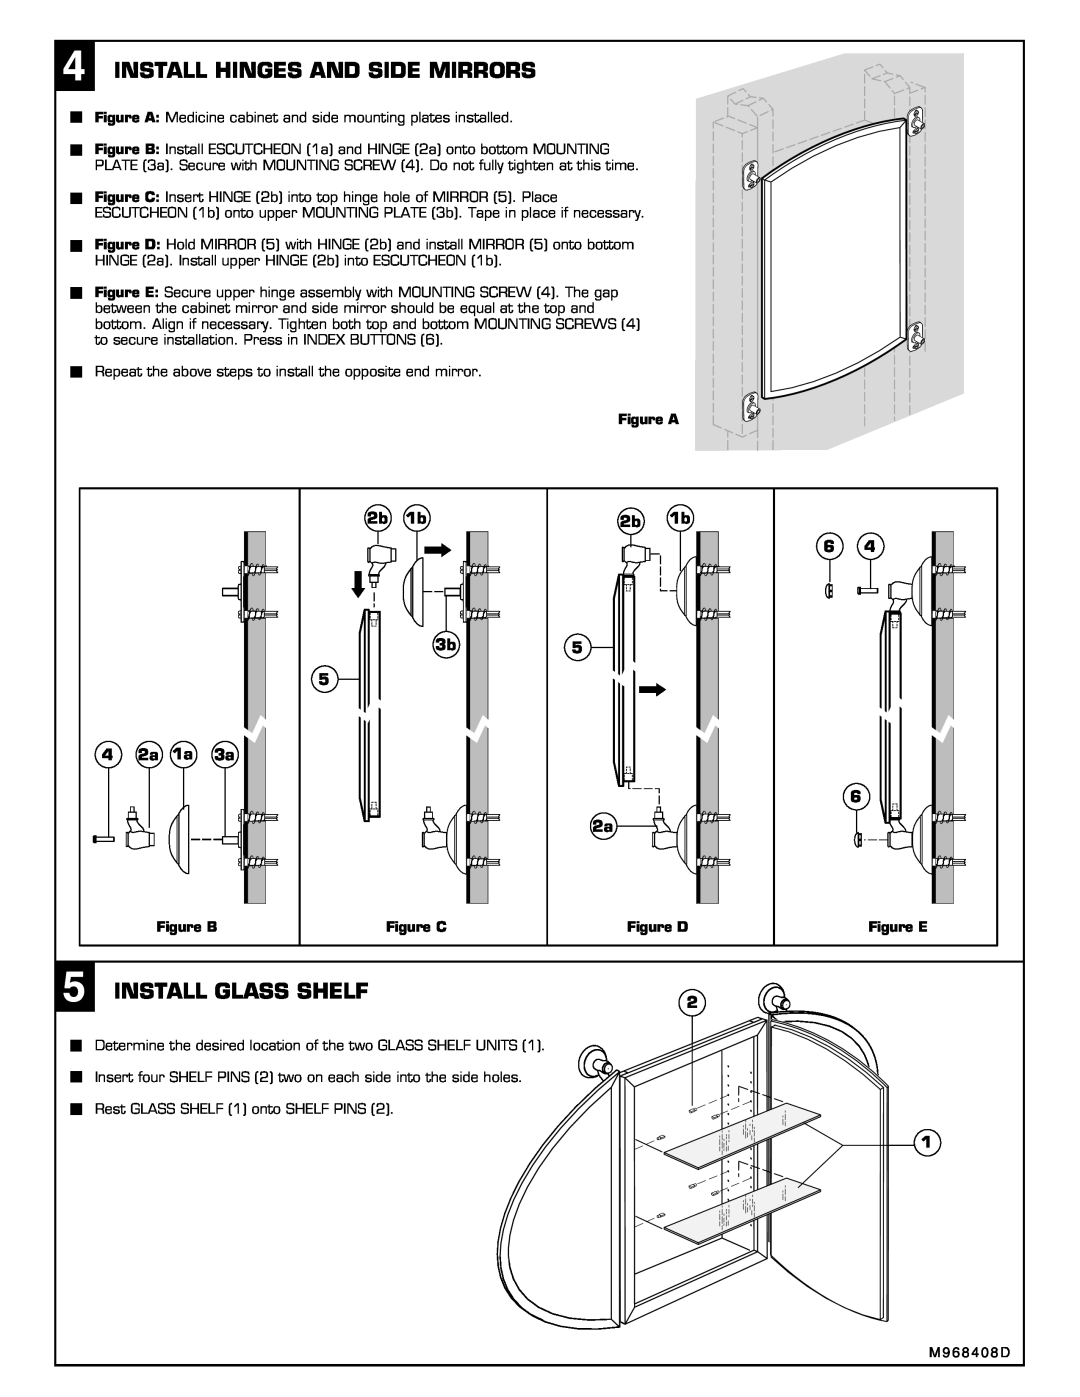 American Standard 6771 Install Hinges And Side Mirrors, Install Glass Shelf, 4 2a 1a 3a, 2b 1b 3b 5, 2b 1b 5 2a, Figure C 